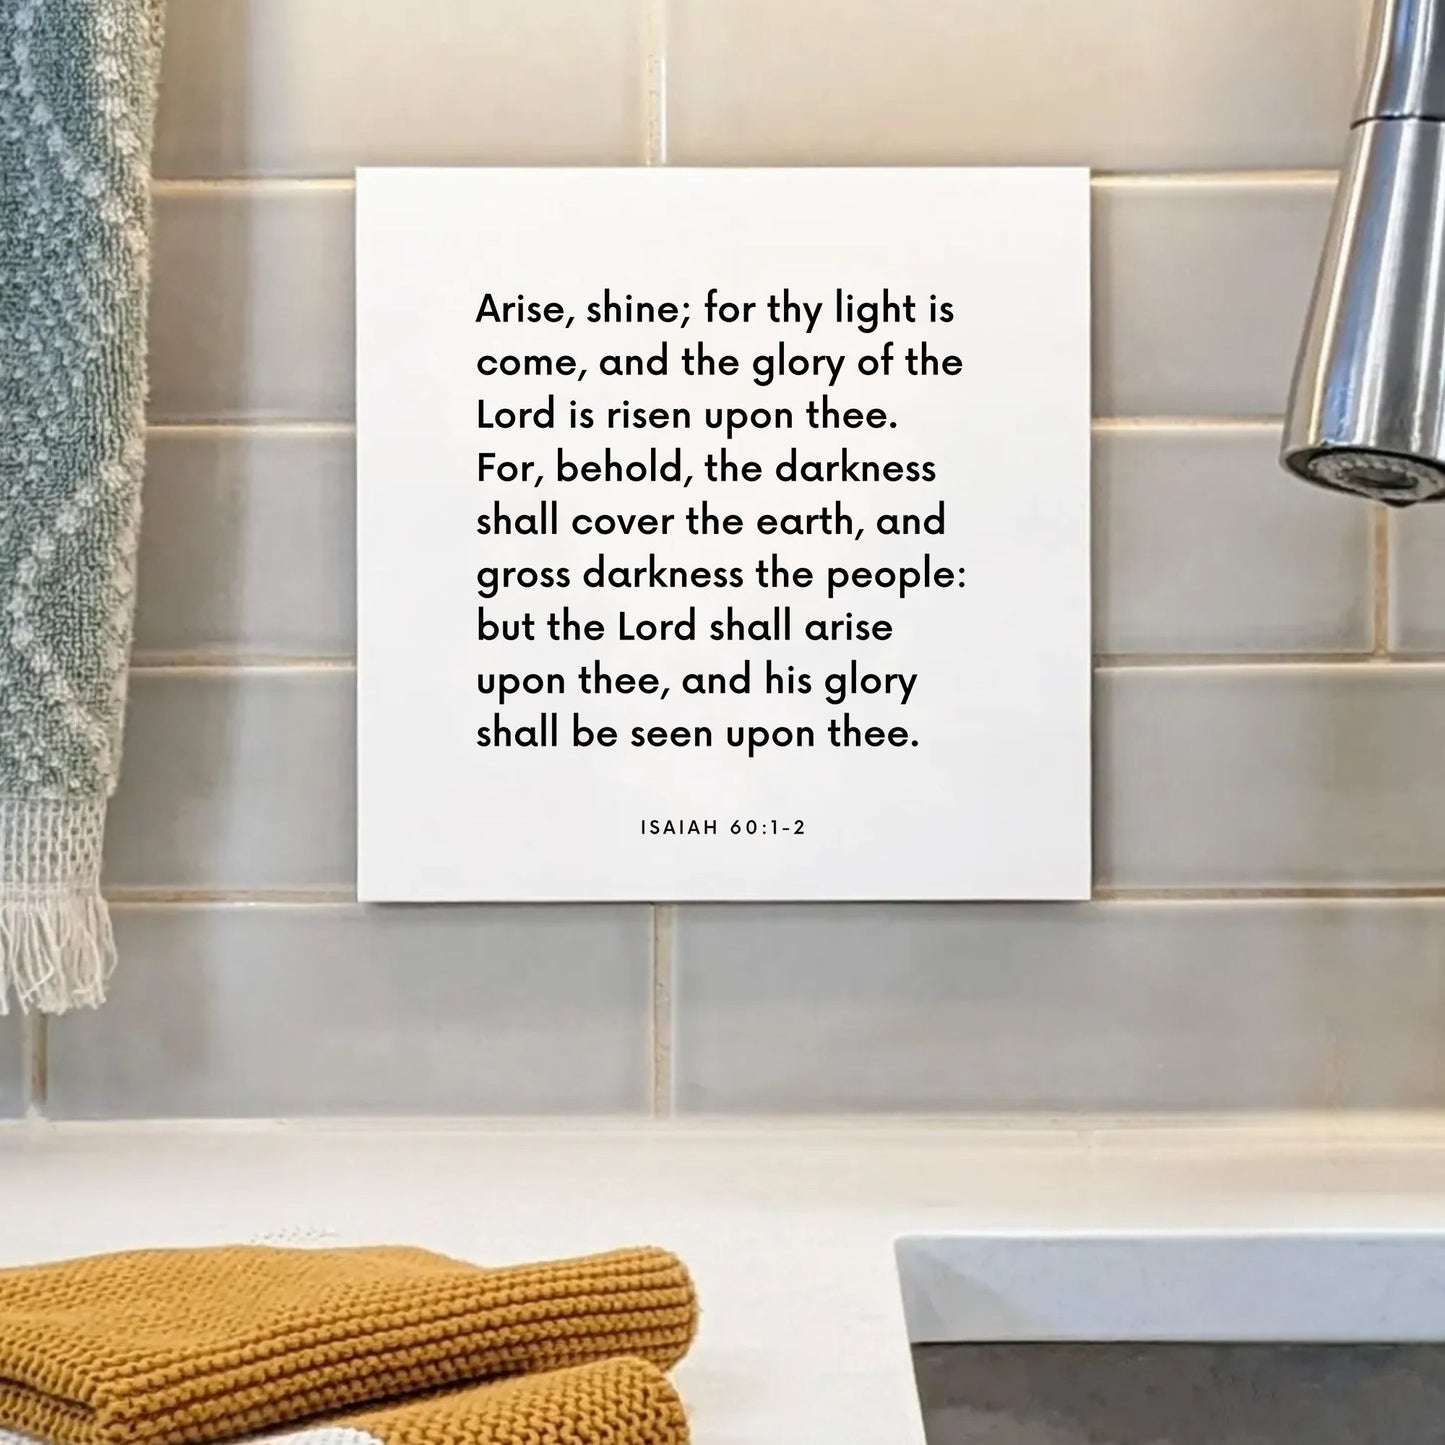 Sink mouting of the scripture tile for Isaiah 60:1-2 - "The glory of the Lord is risen upon thee"